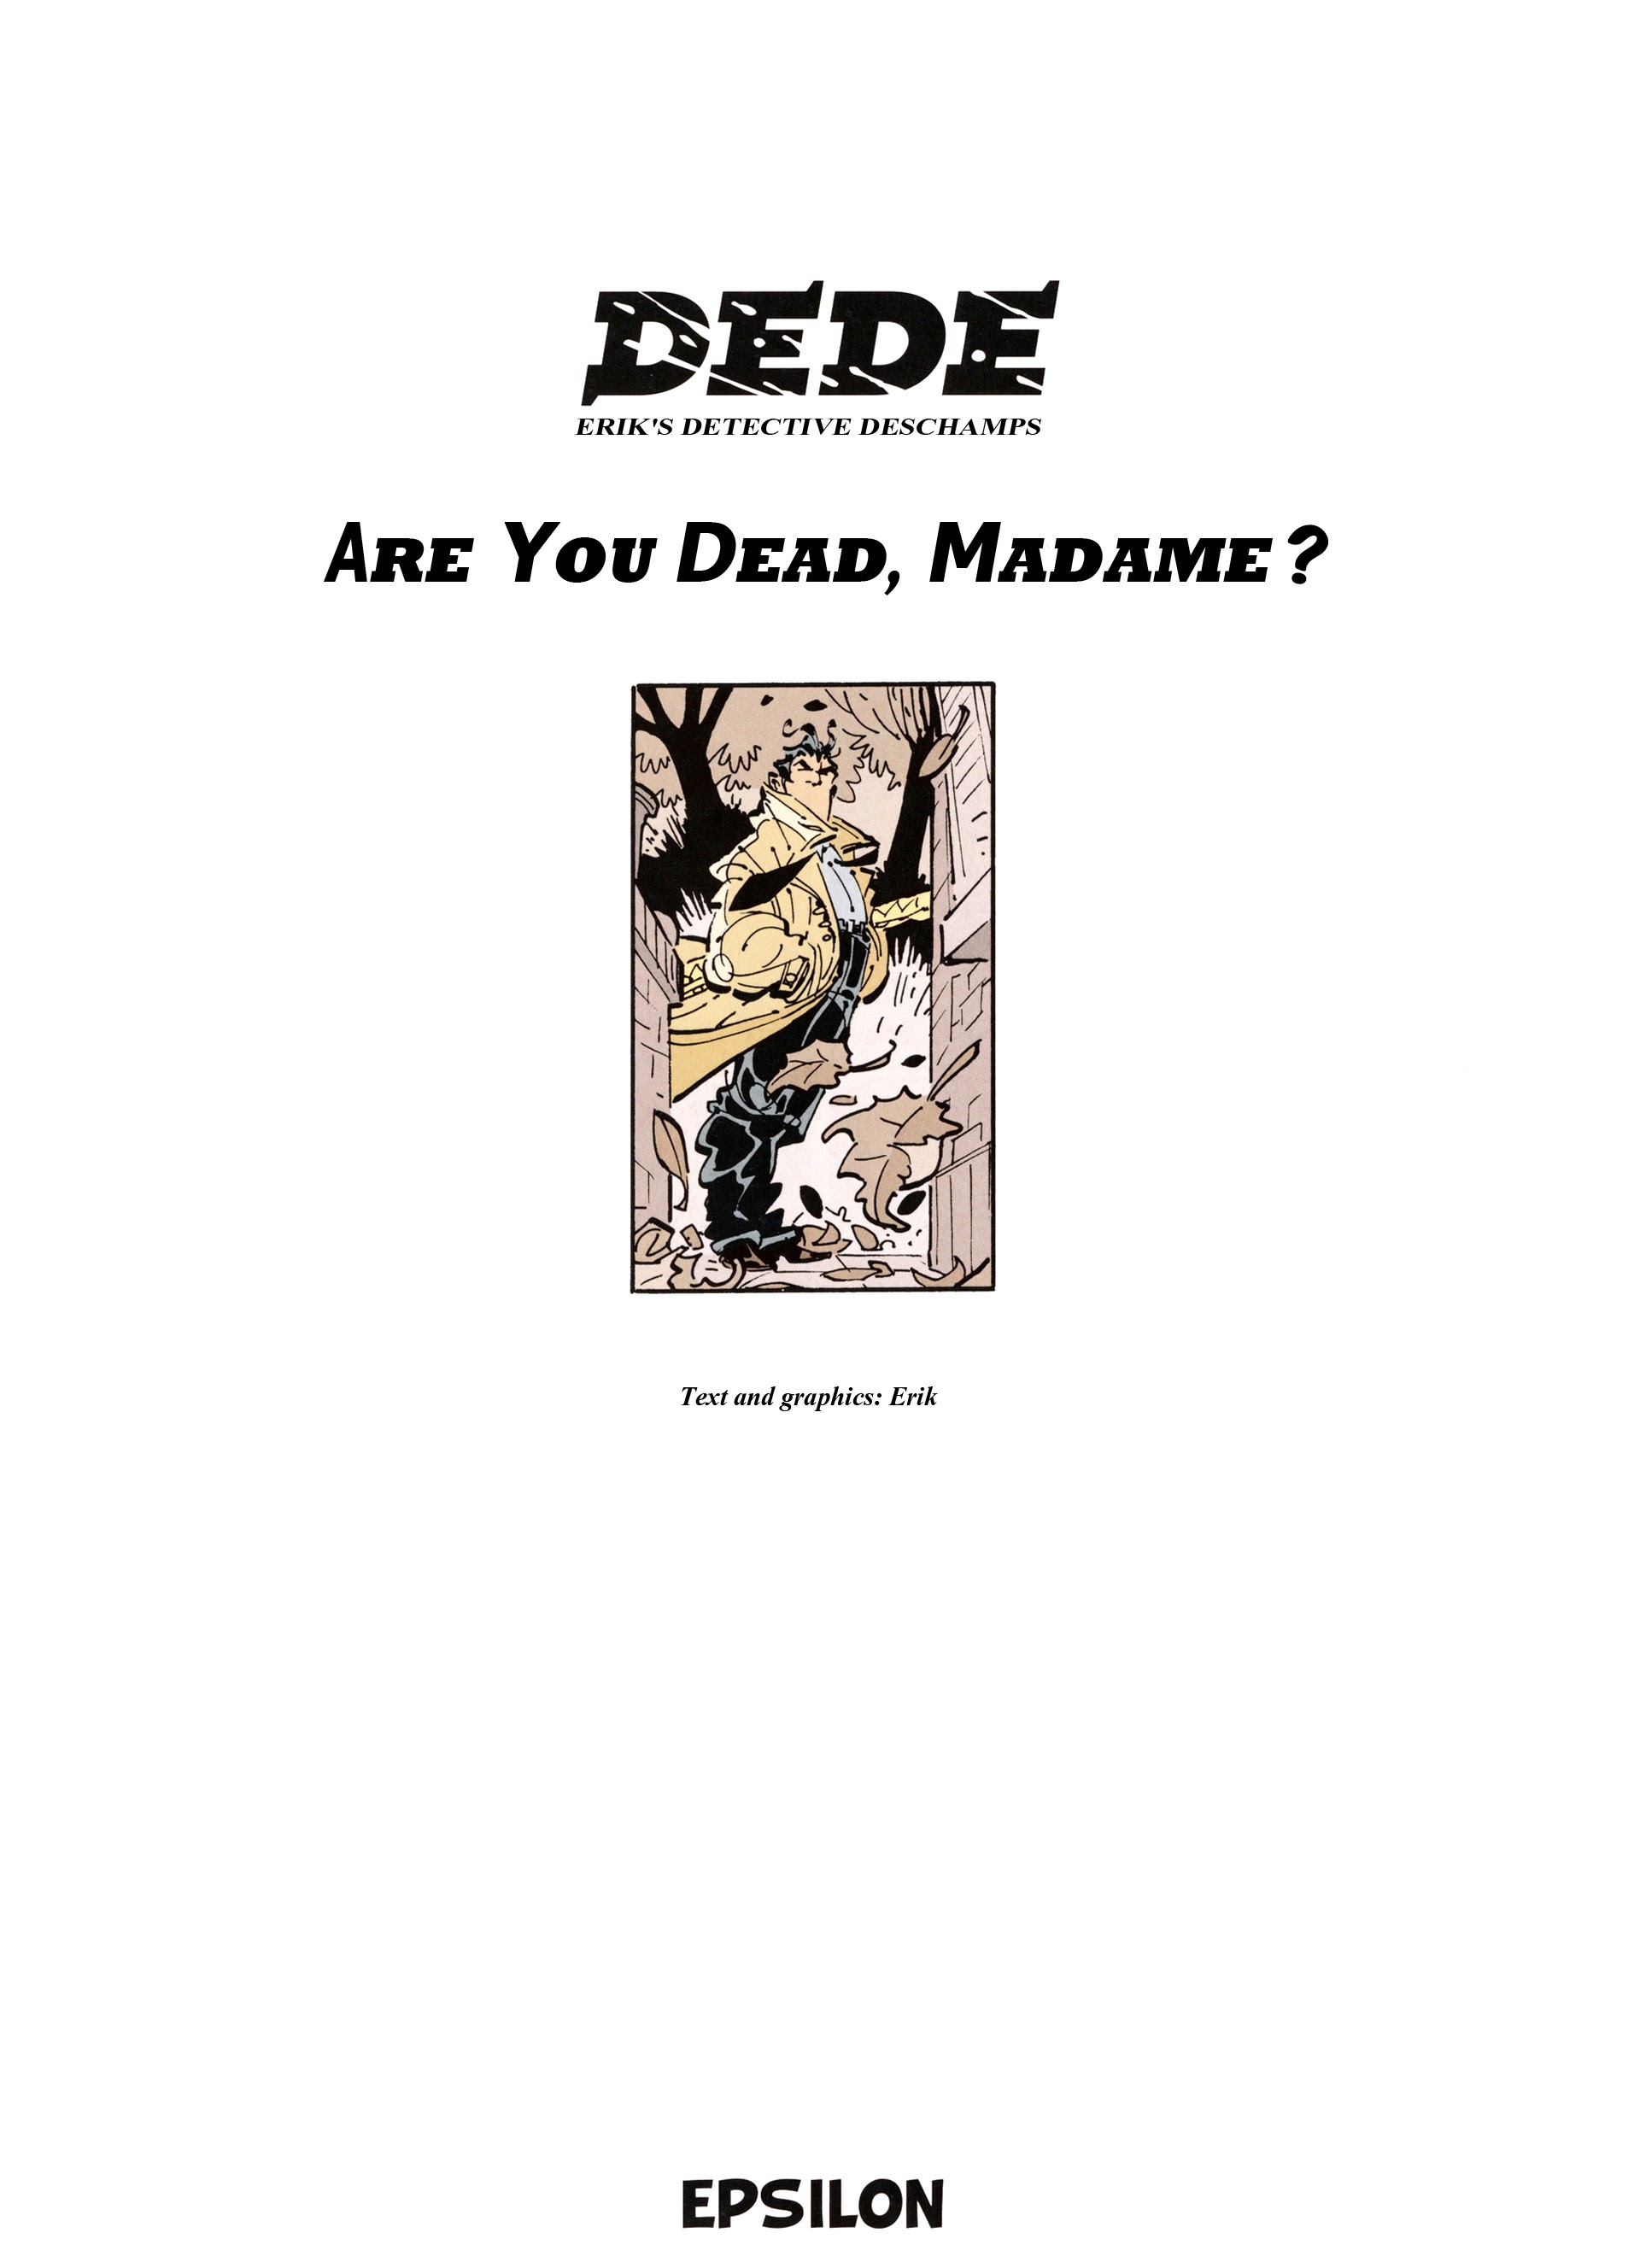 Read online Dede comic -  Issue #1 - 3